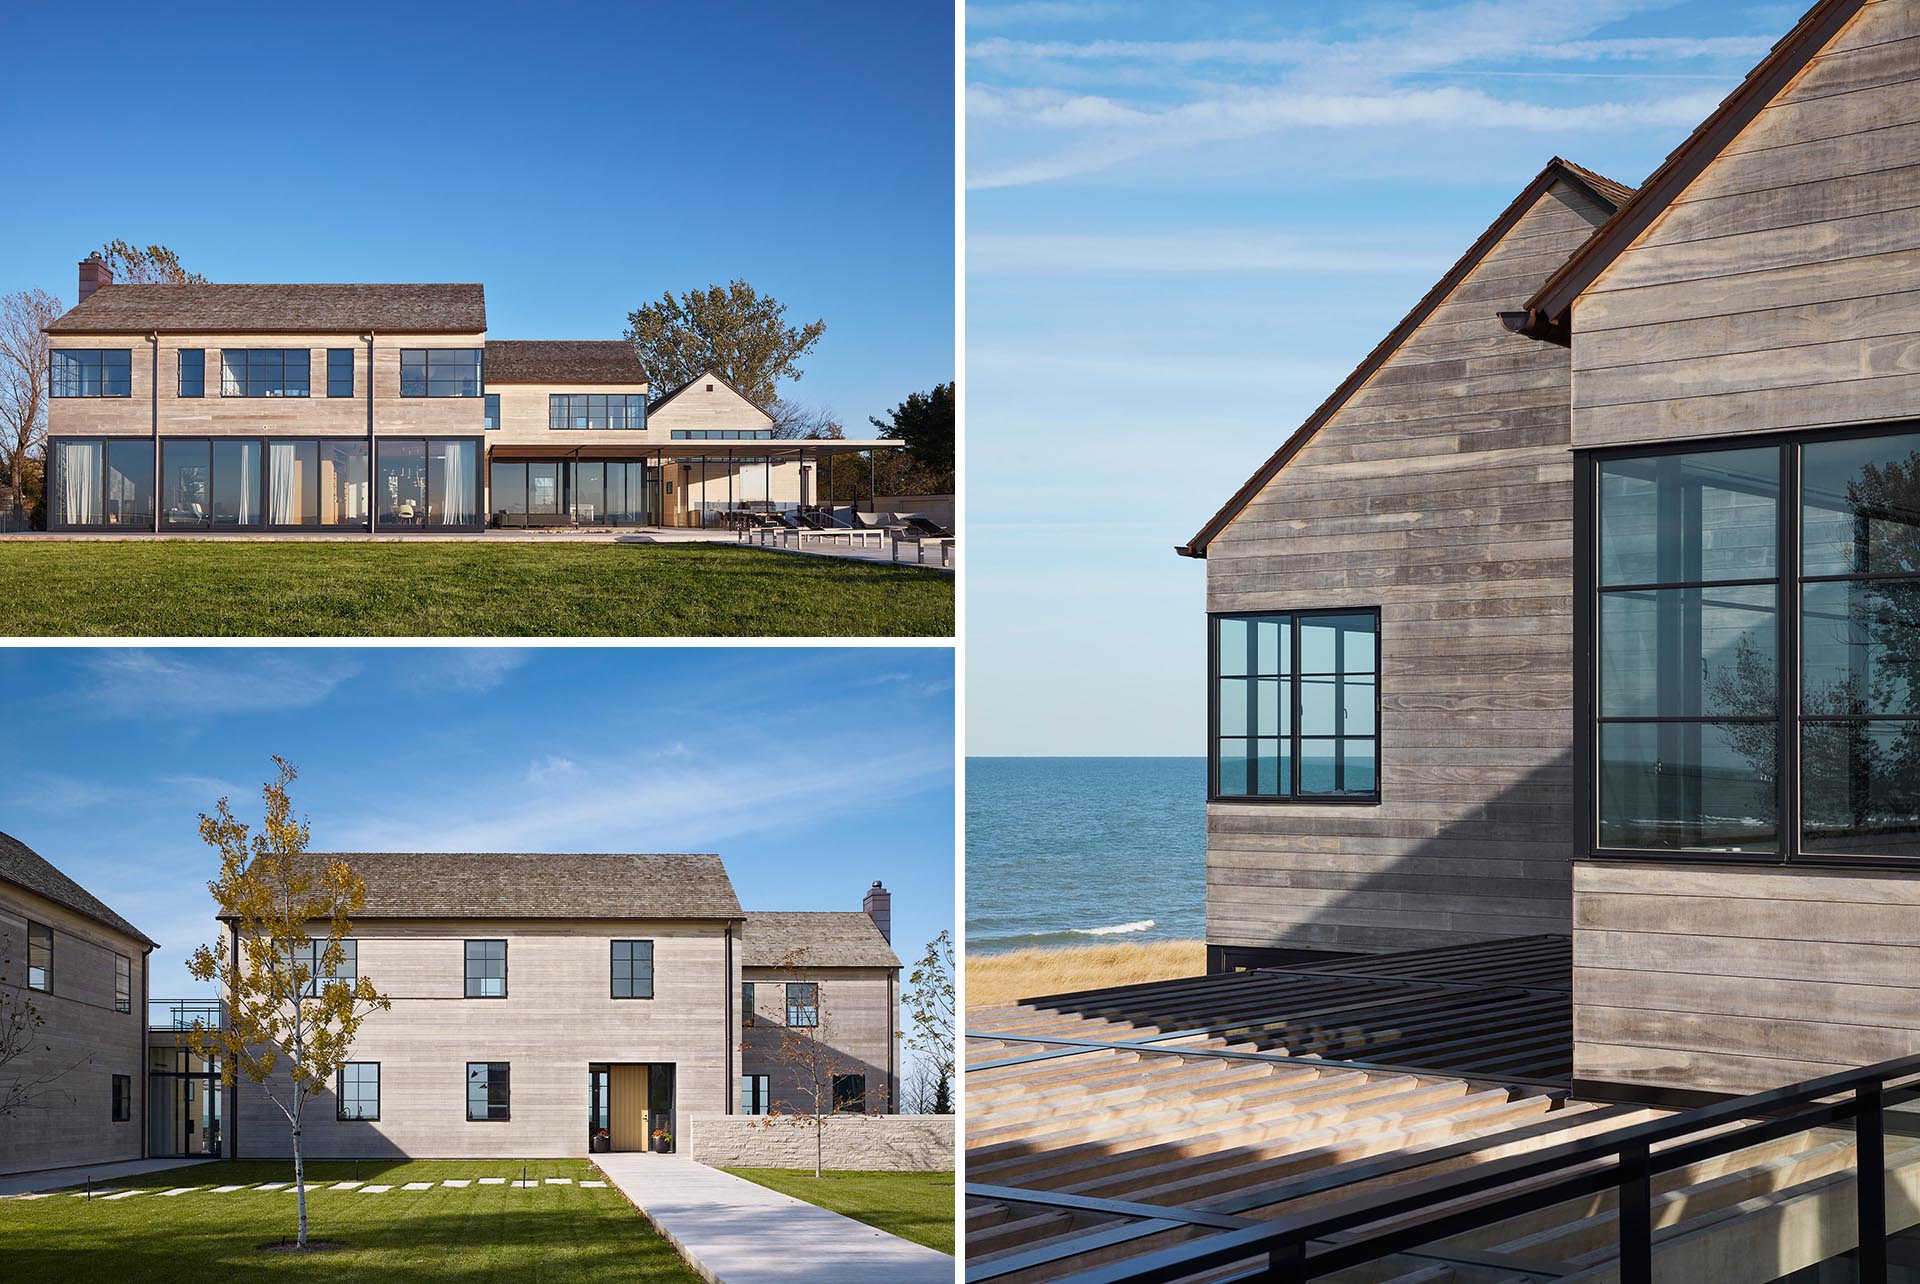 The Accoya wood siding of this modern home complements the cedar shingles that have been used on the roof, both of which will weather gracefully in the constant wind coming off the lake.